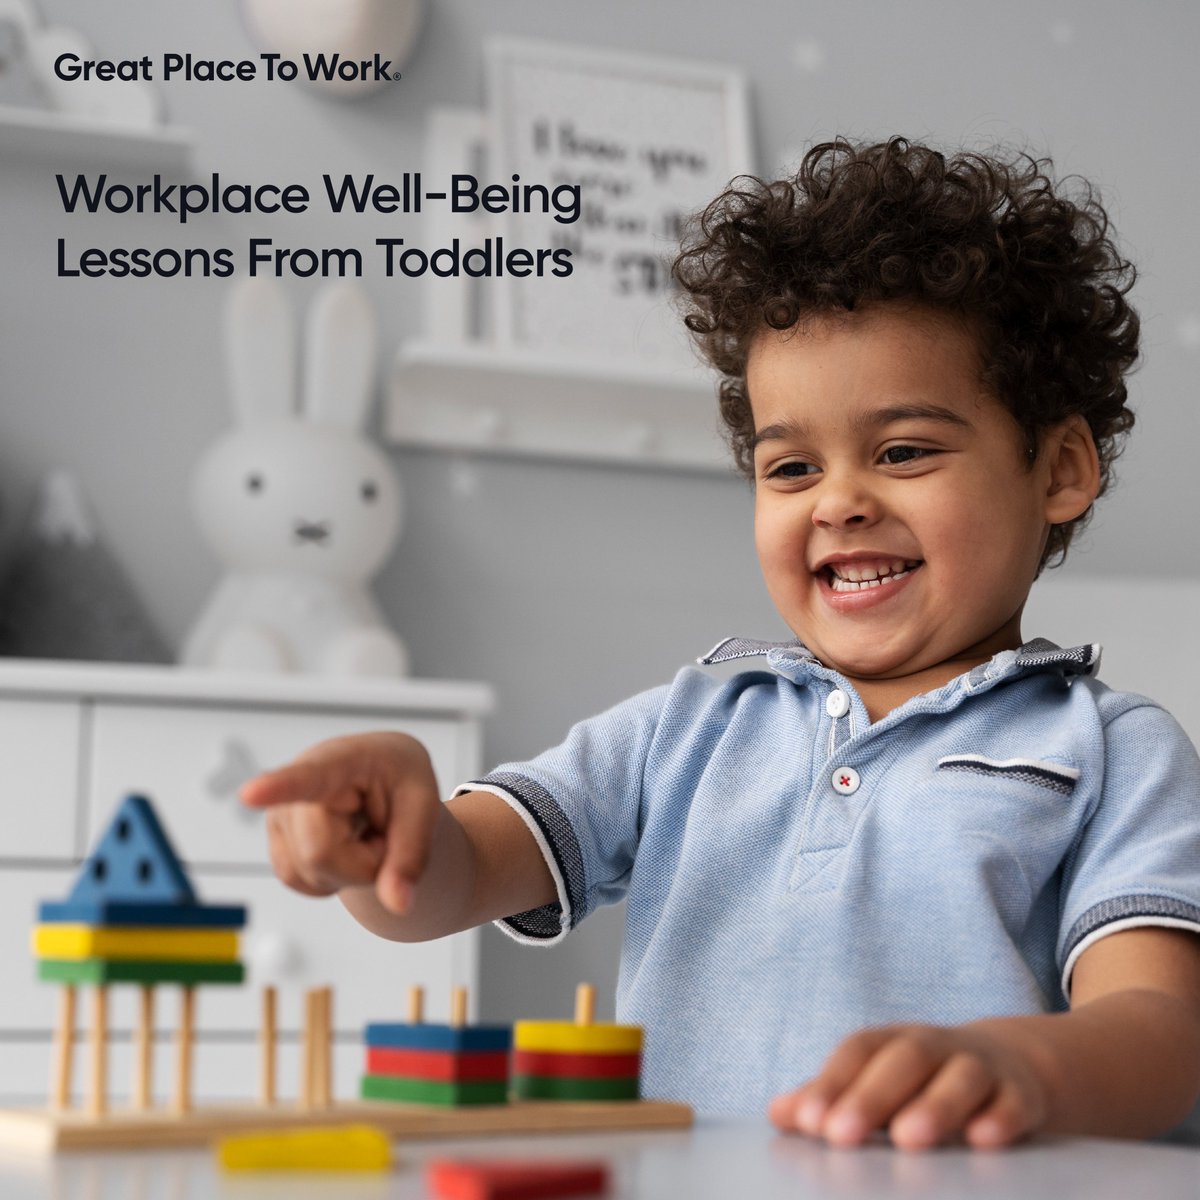 Adults can glean valuable insights on workplace well-being from observing toddlers. Adults can rejuvenate their focus and energy levels by integrating structured breaks reminiscent of toddlers' outdoor play and rest periods. Embracing teamwork with a spirit of collaboration…